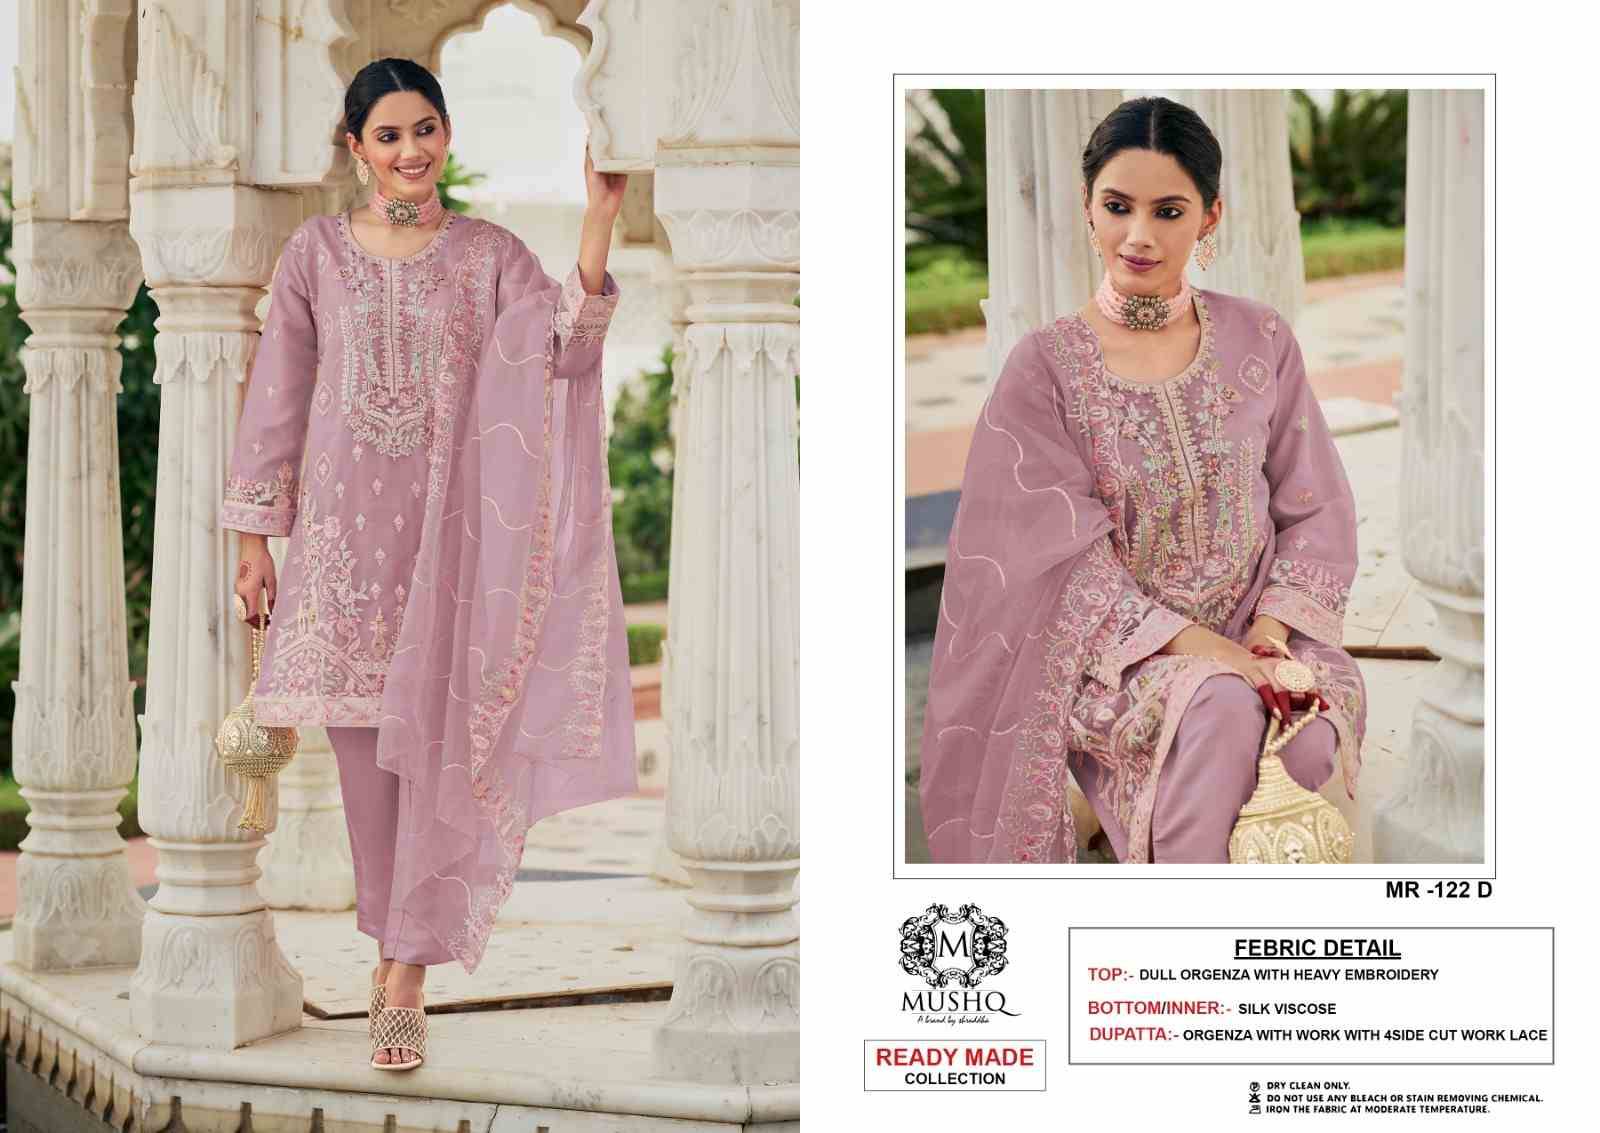 Mushq Hit Design 122 Colours By Mushq 122-A To 122-D Series Beautiful Pakistani Suits Colorful Stylish Fancy Casual Wear & Ethnic Wear Pure Organza Dresses At Wholesale Price